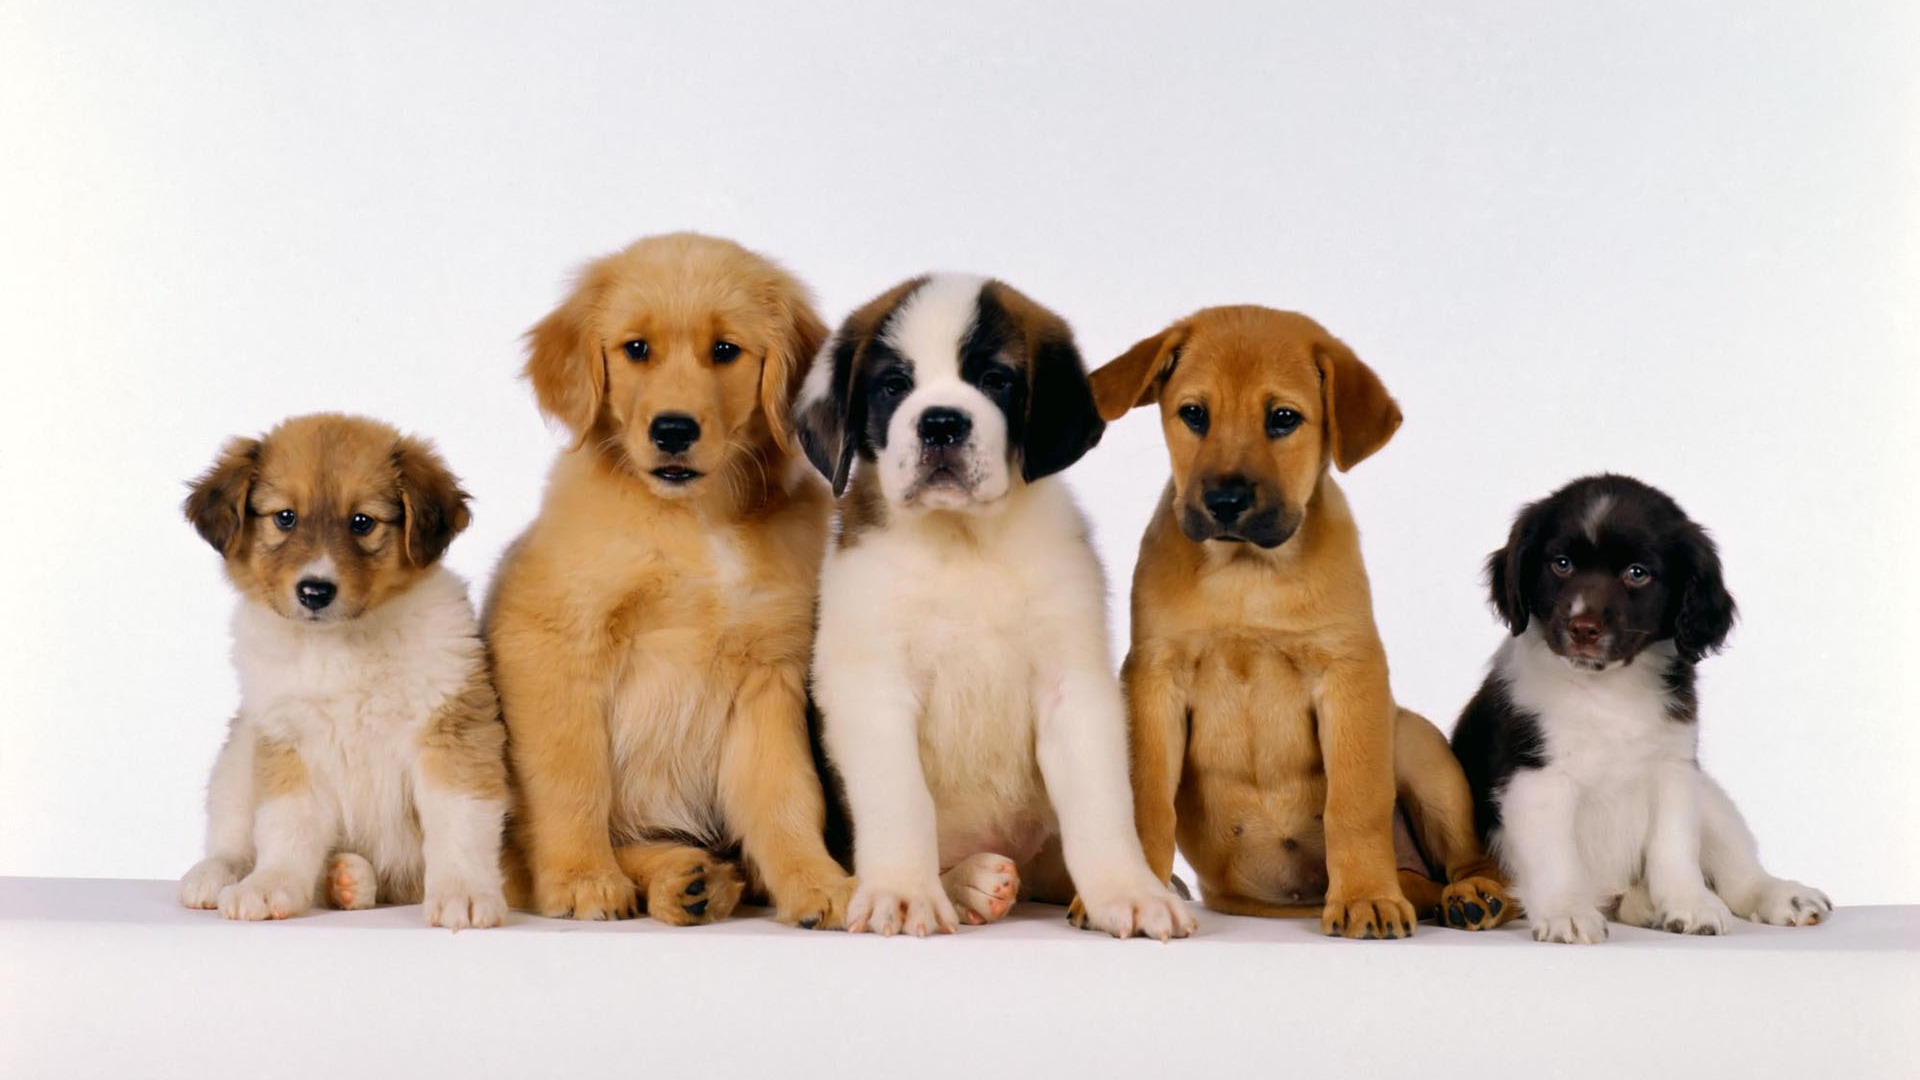 Puppy Photo HD wallpapers (1) #1 - 1920x1080